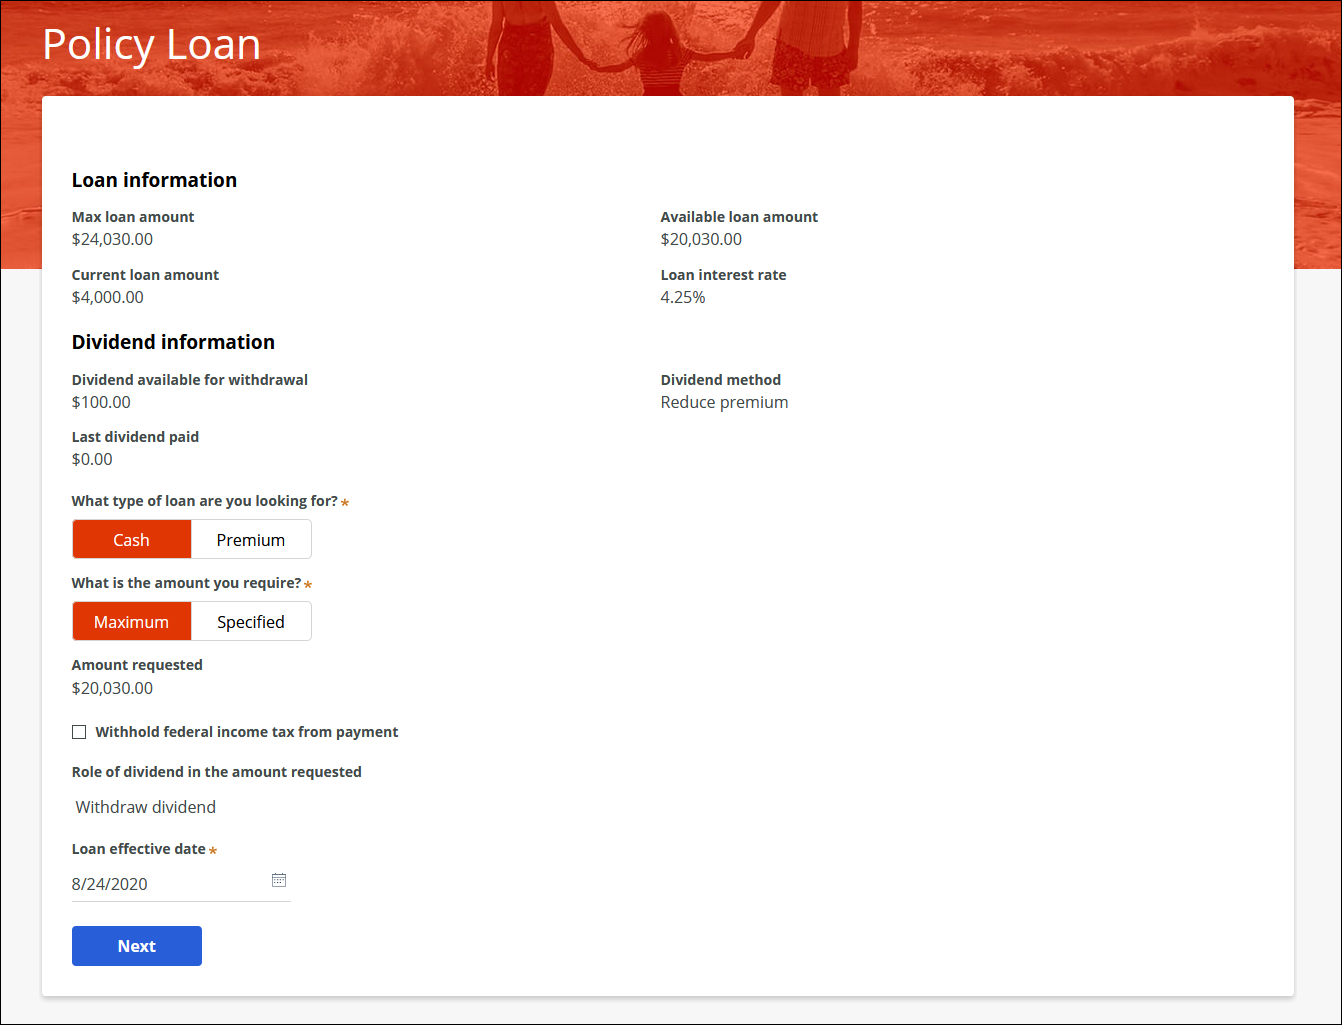 The page in the self-service portal where the policyholder enters policy loan details, such as loan type and requested amount